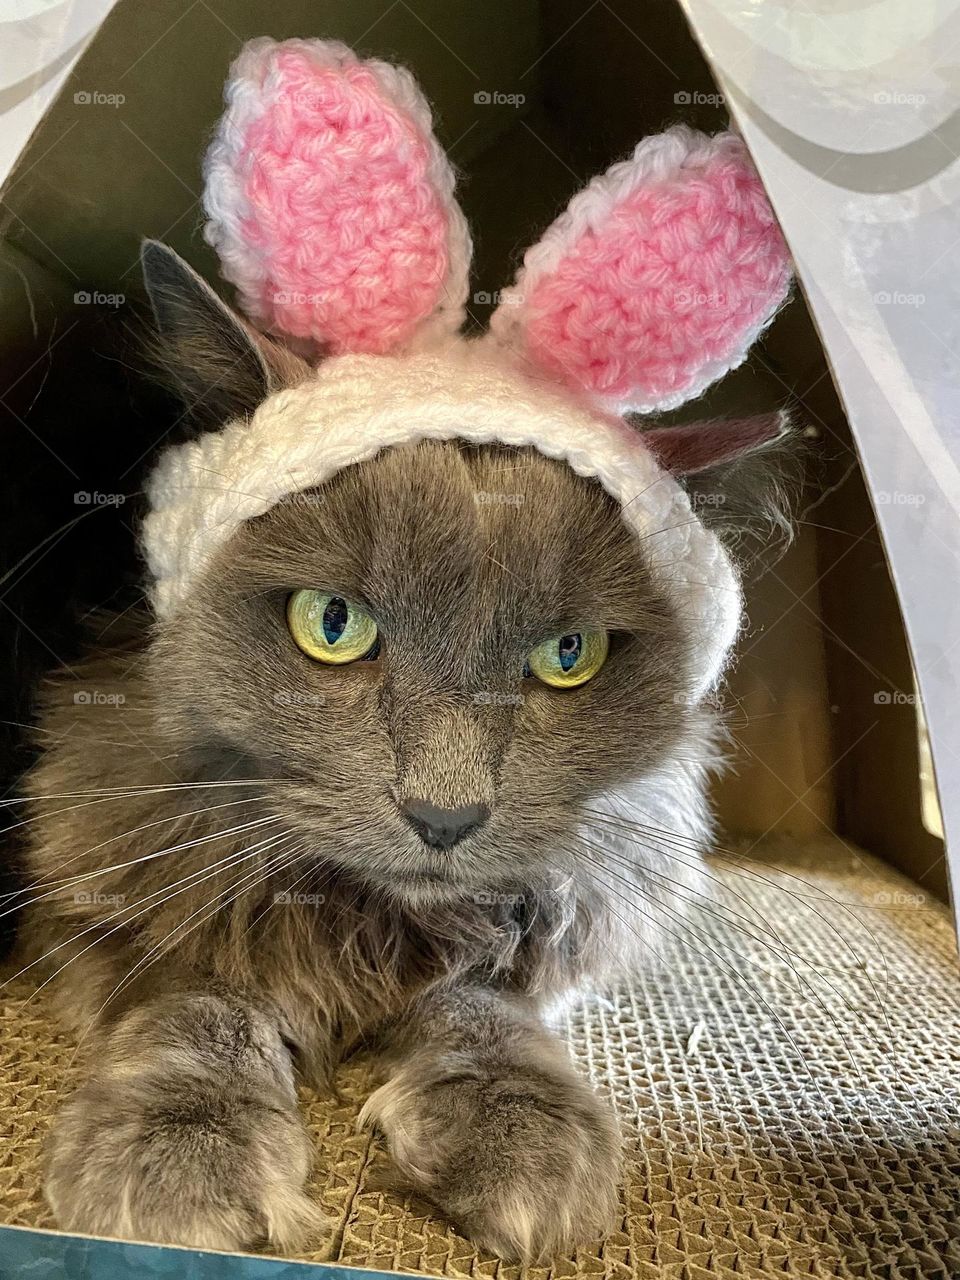 A grey cat wearing a crocheted hat with rabbit ears